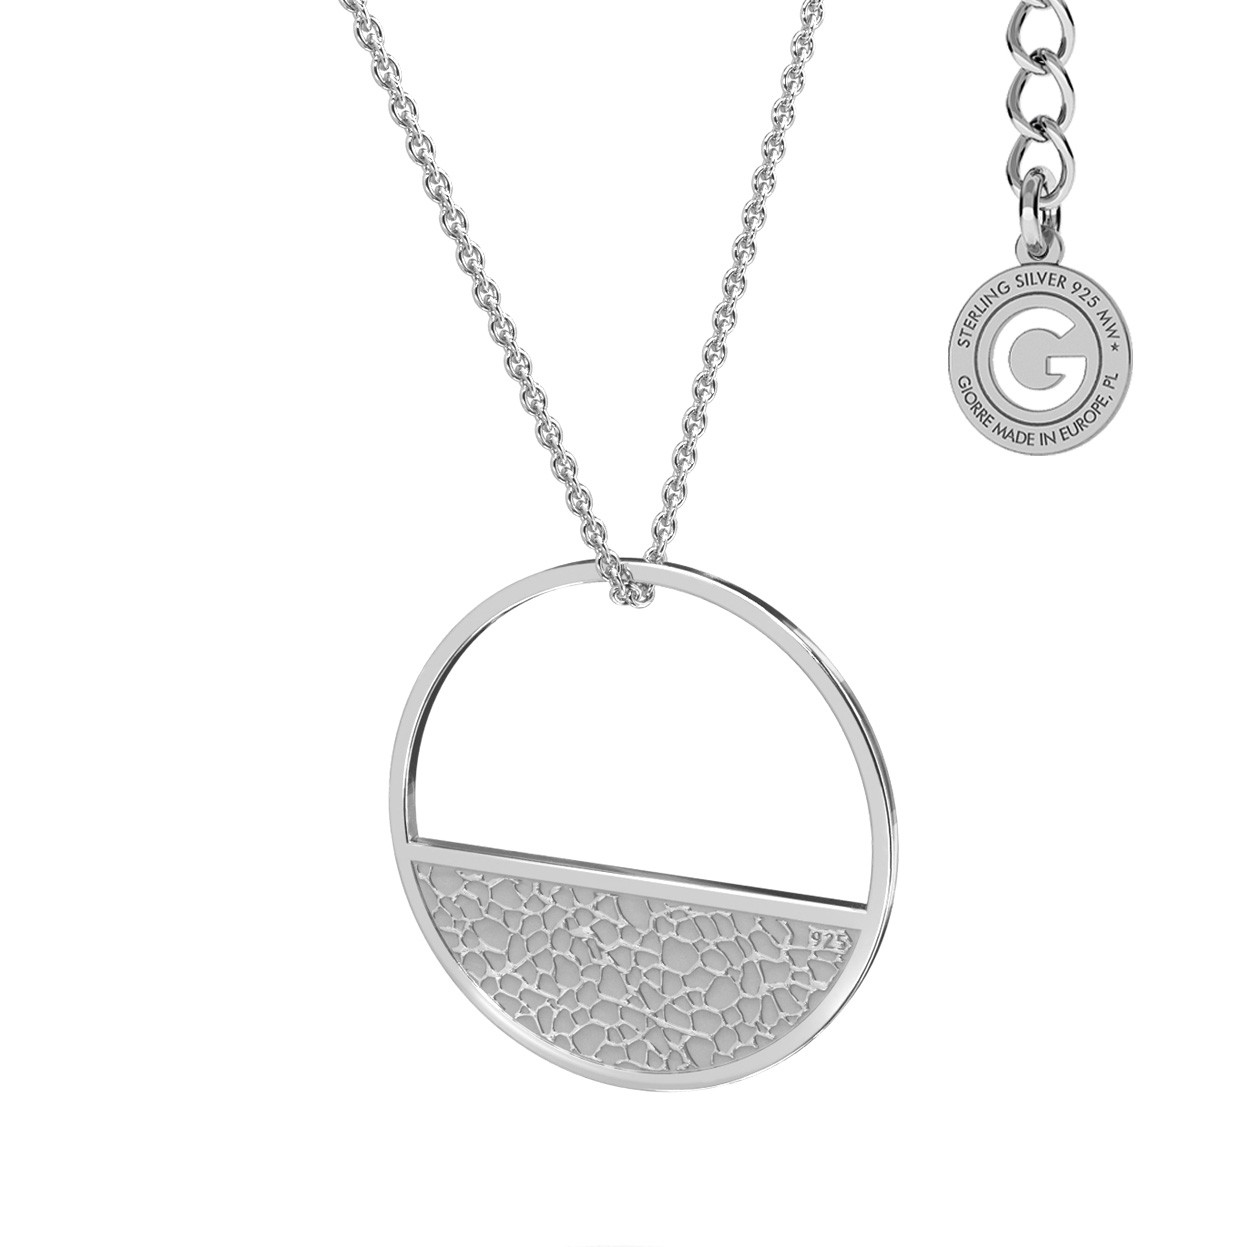 Silver wing necklace, sterling silver 925